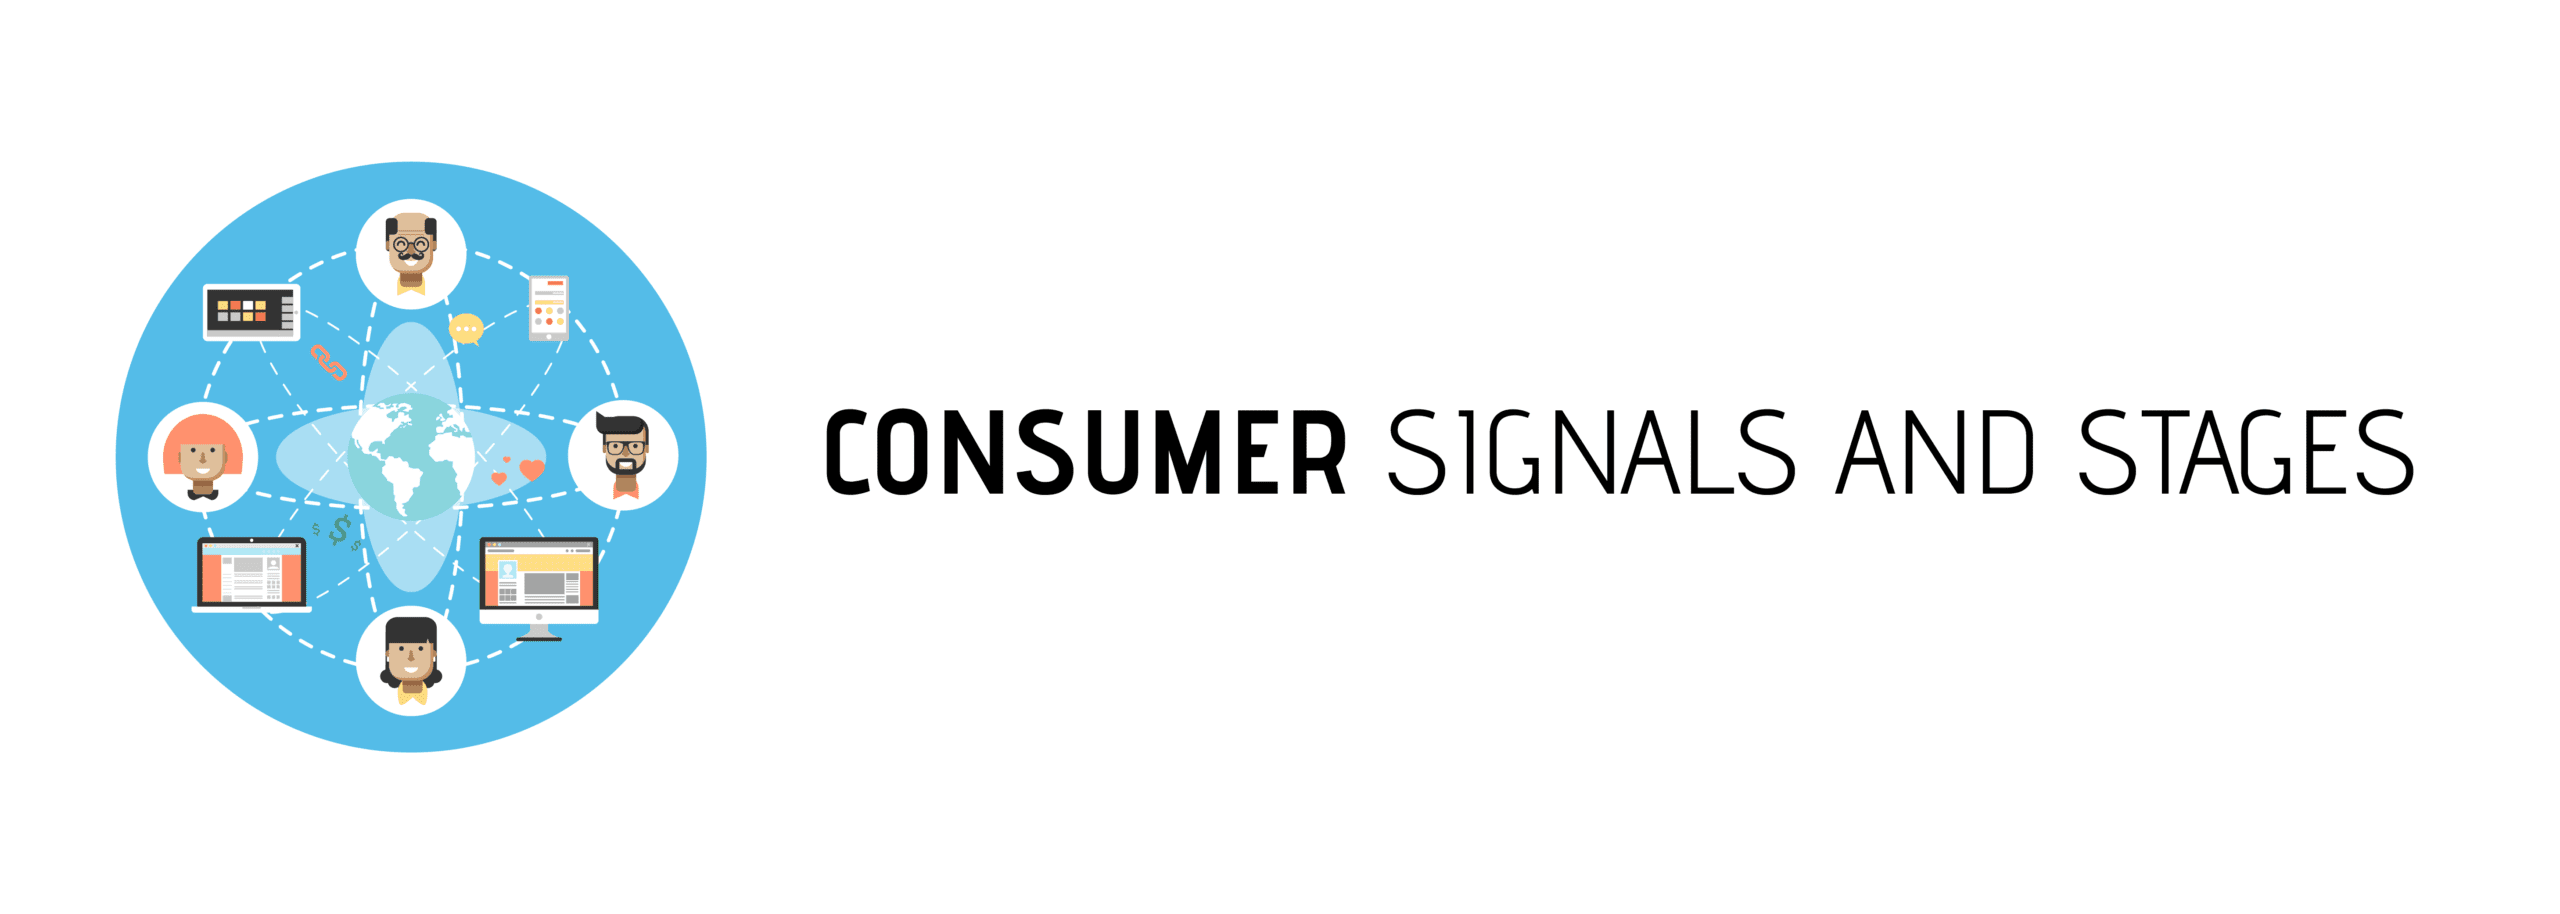 Consumer Signals Photo With Audience Profile Example